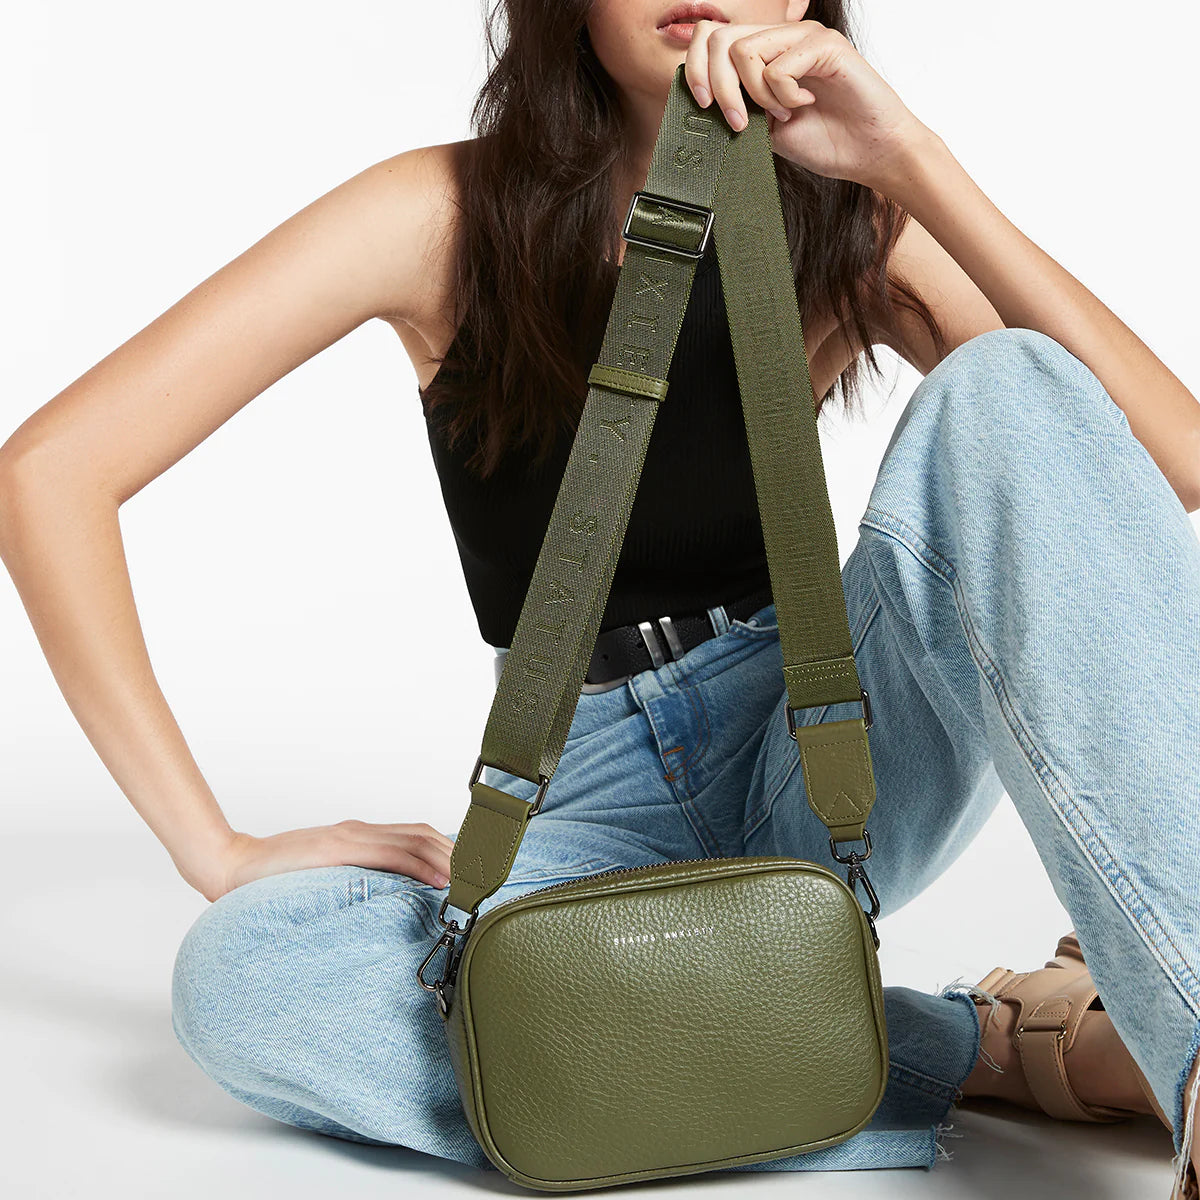 Status Anxiety Bag - Plunder - Khaki with Webbed Strap